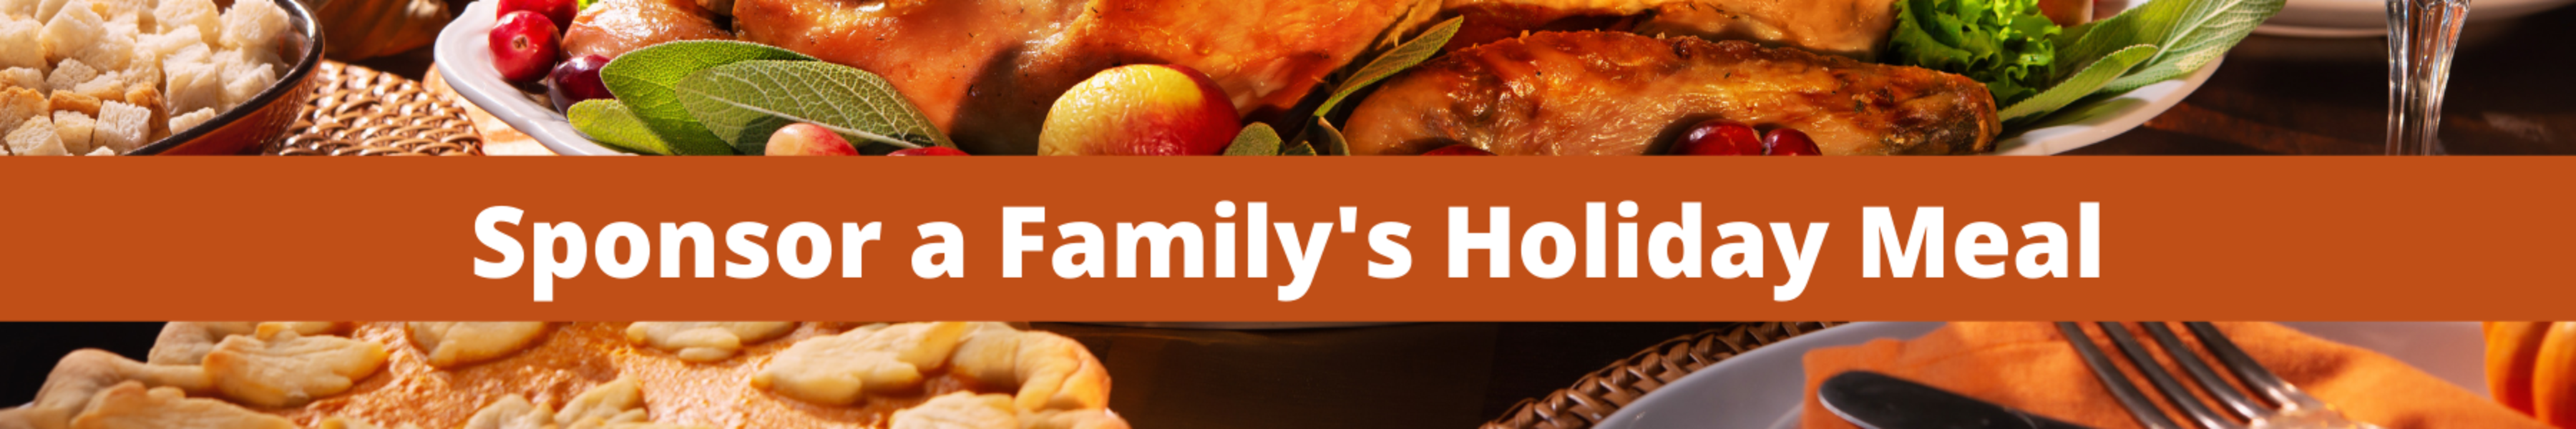 Sponsor A Familys Holiday Meal 1800 X 300 Px